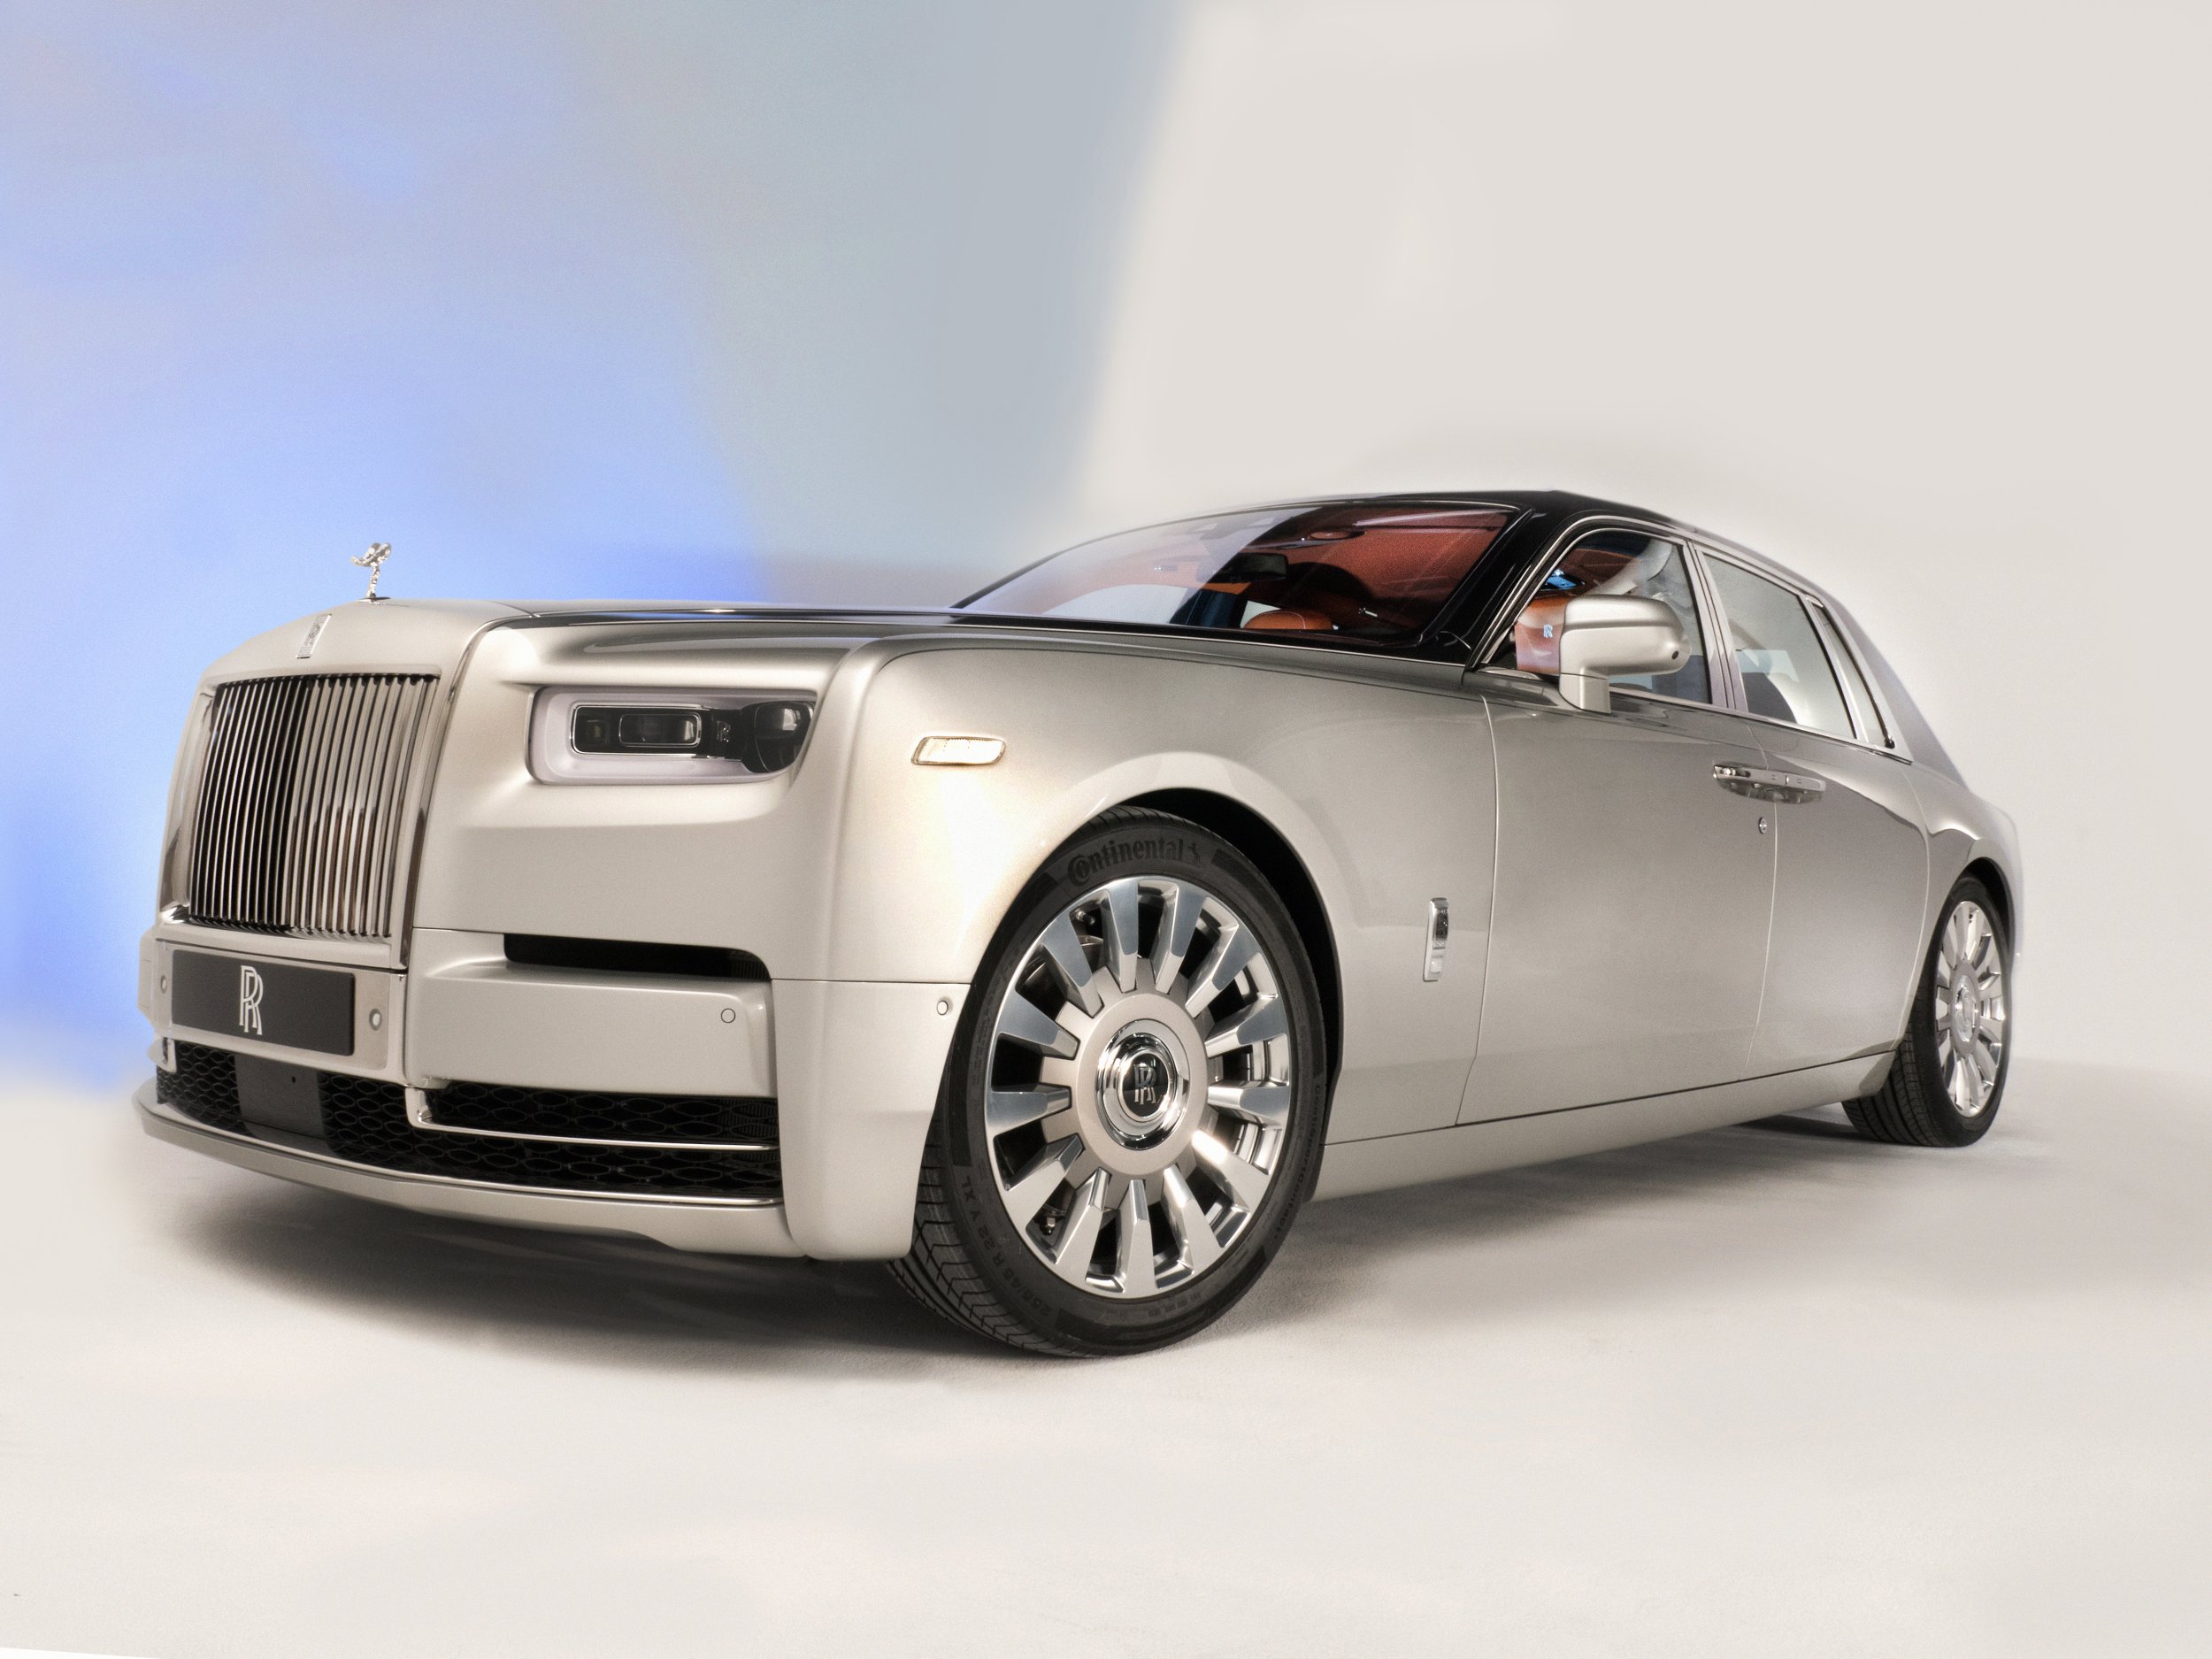 Rolls Royce is one of Jay-Z beloved cars, even making an appearance in his song lyrics